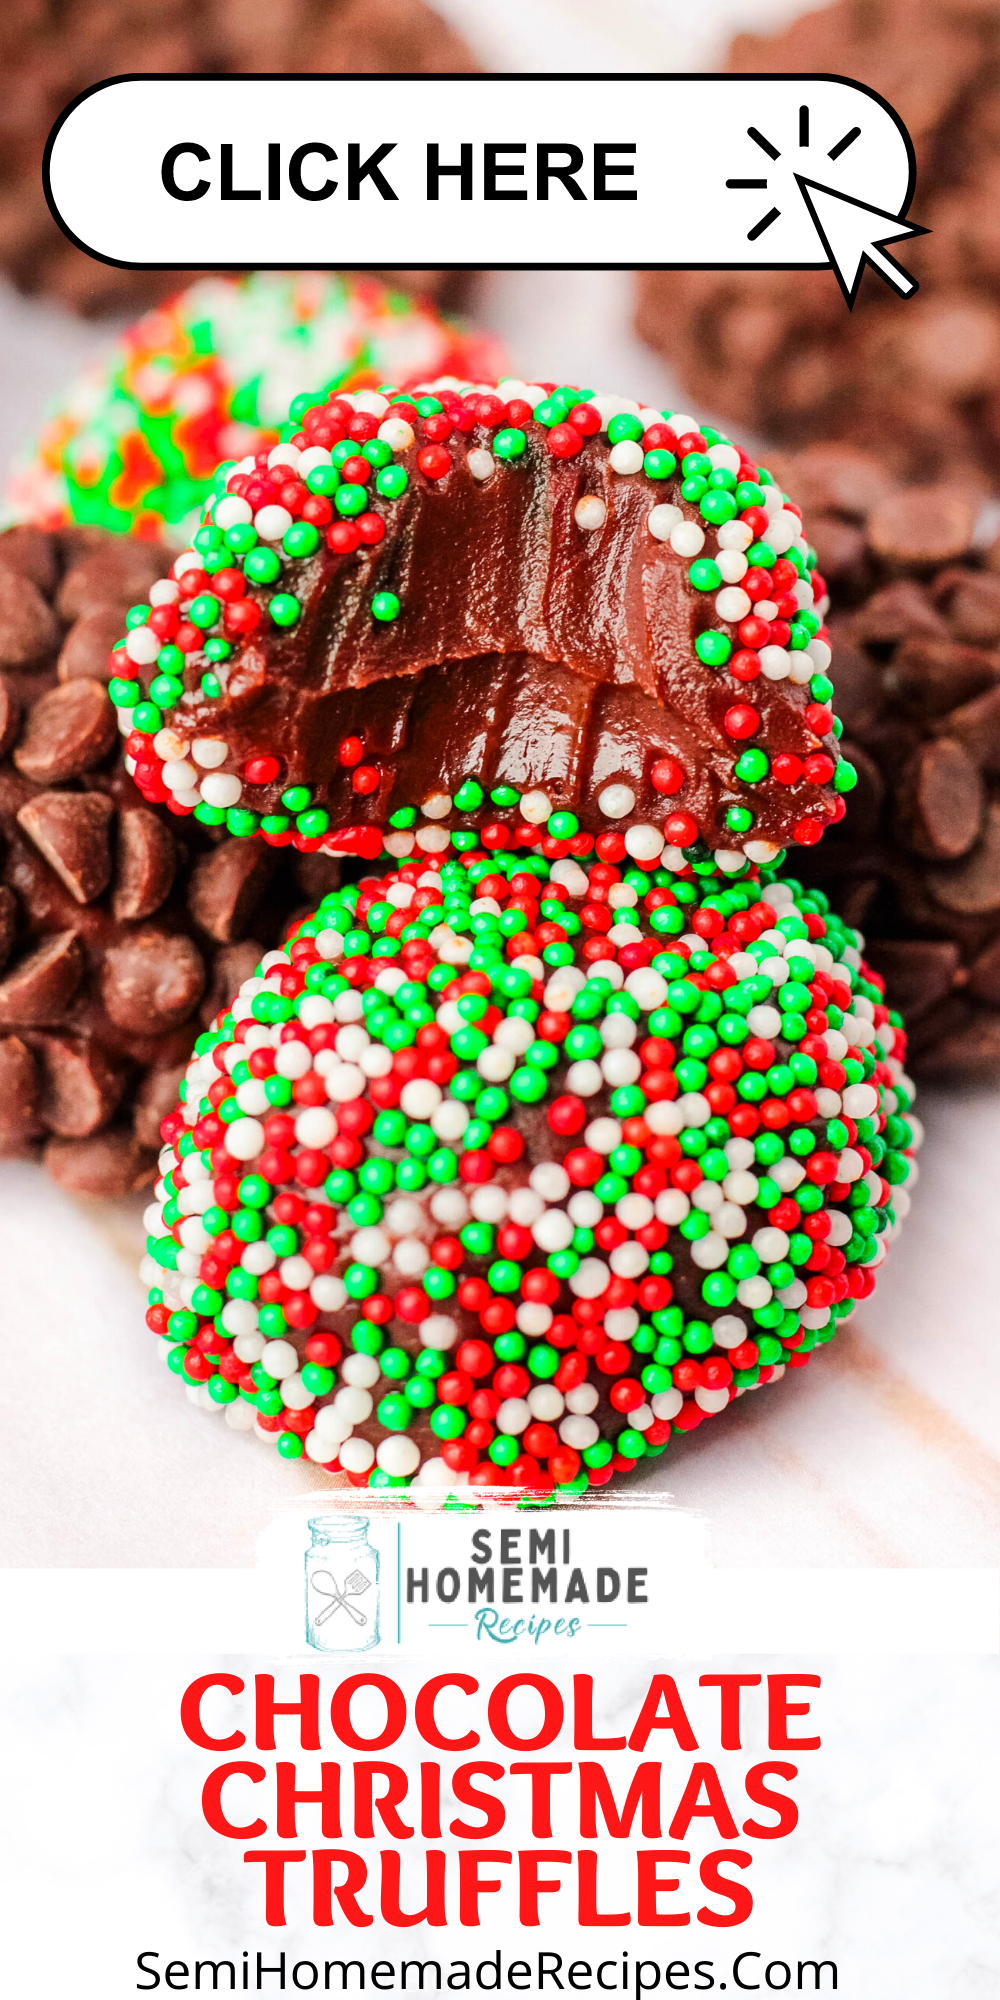 These Super Easy Chocolate Christmas Truffles are perfect for Christmas parties, Christmas eve and homemade gifts!